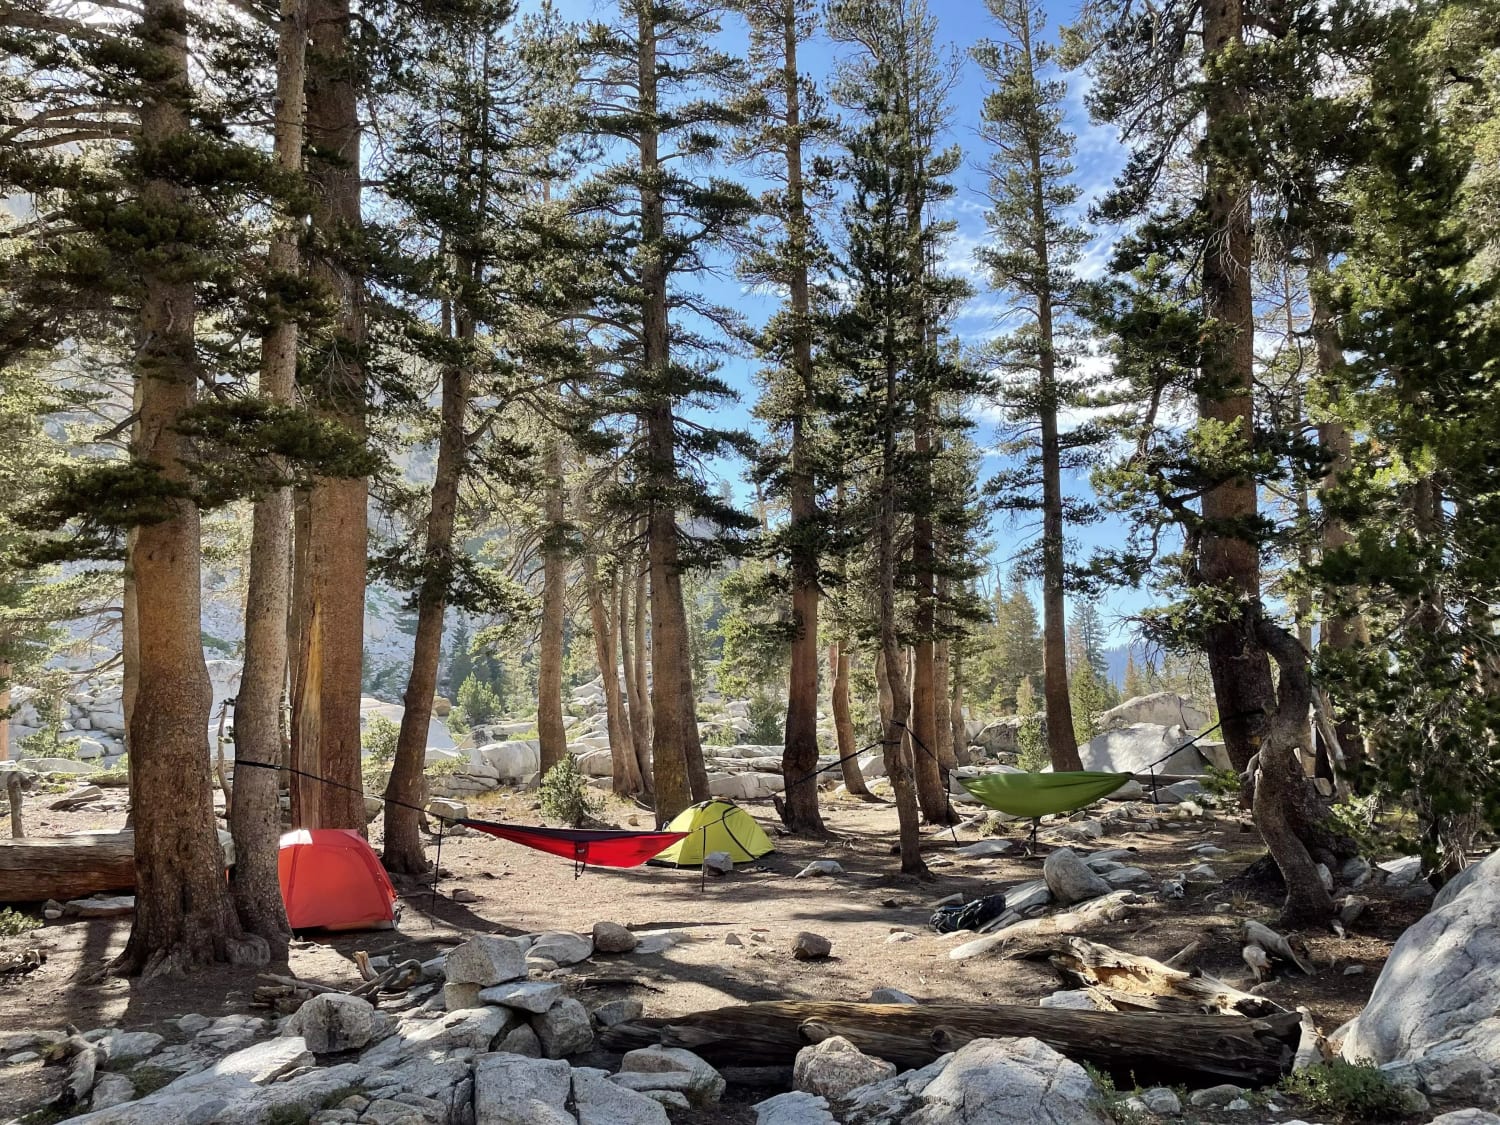 Our campsite at Emerald Lake in Sequoia National Park.